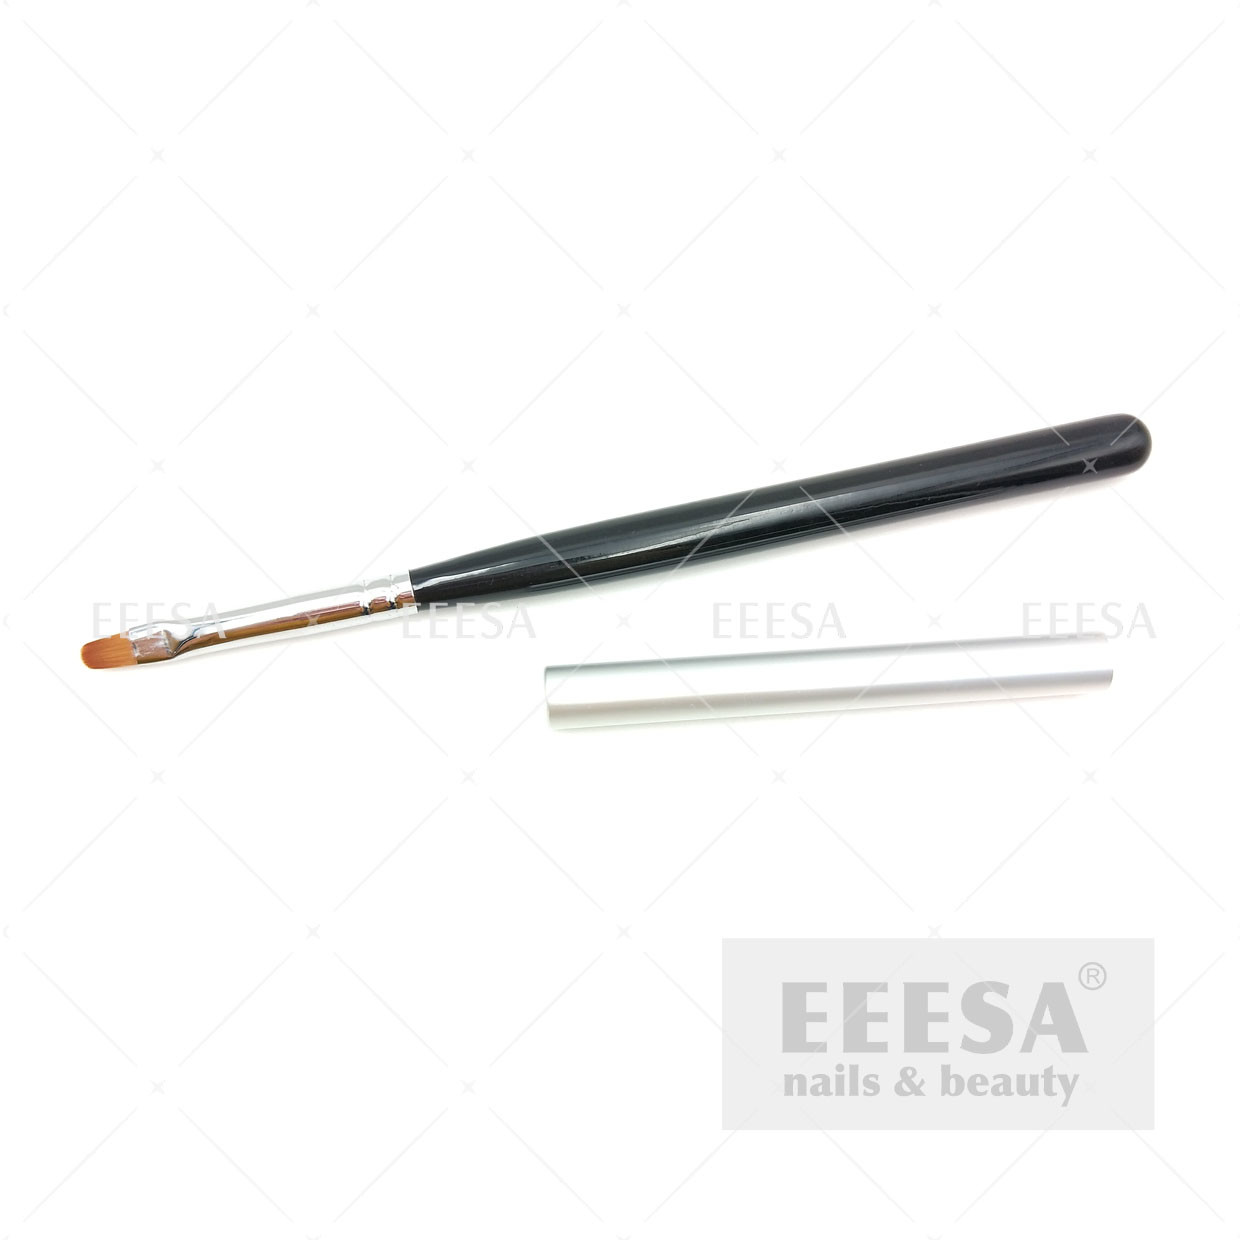  Custom Synthetic Hair Round Oval #4 Black Wood Gel Master Nail Art Brush Manufactures